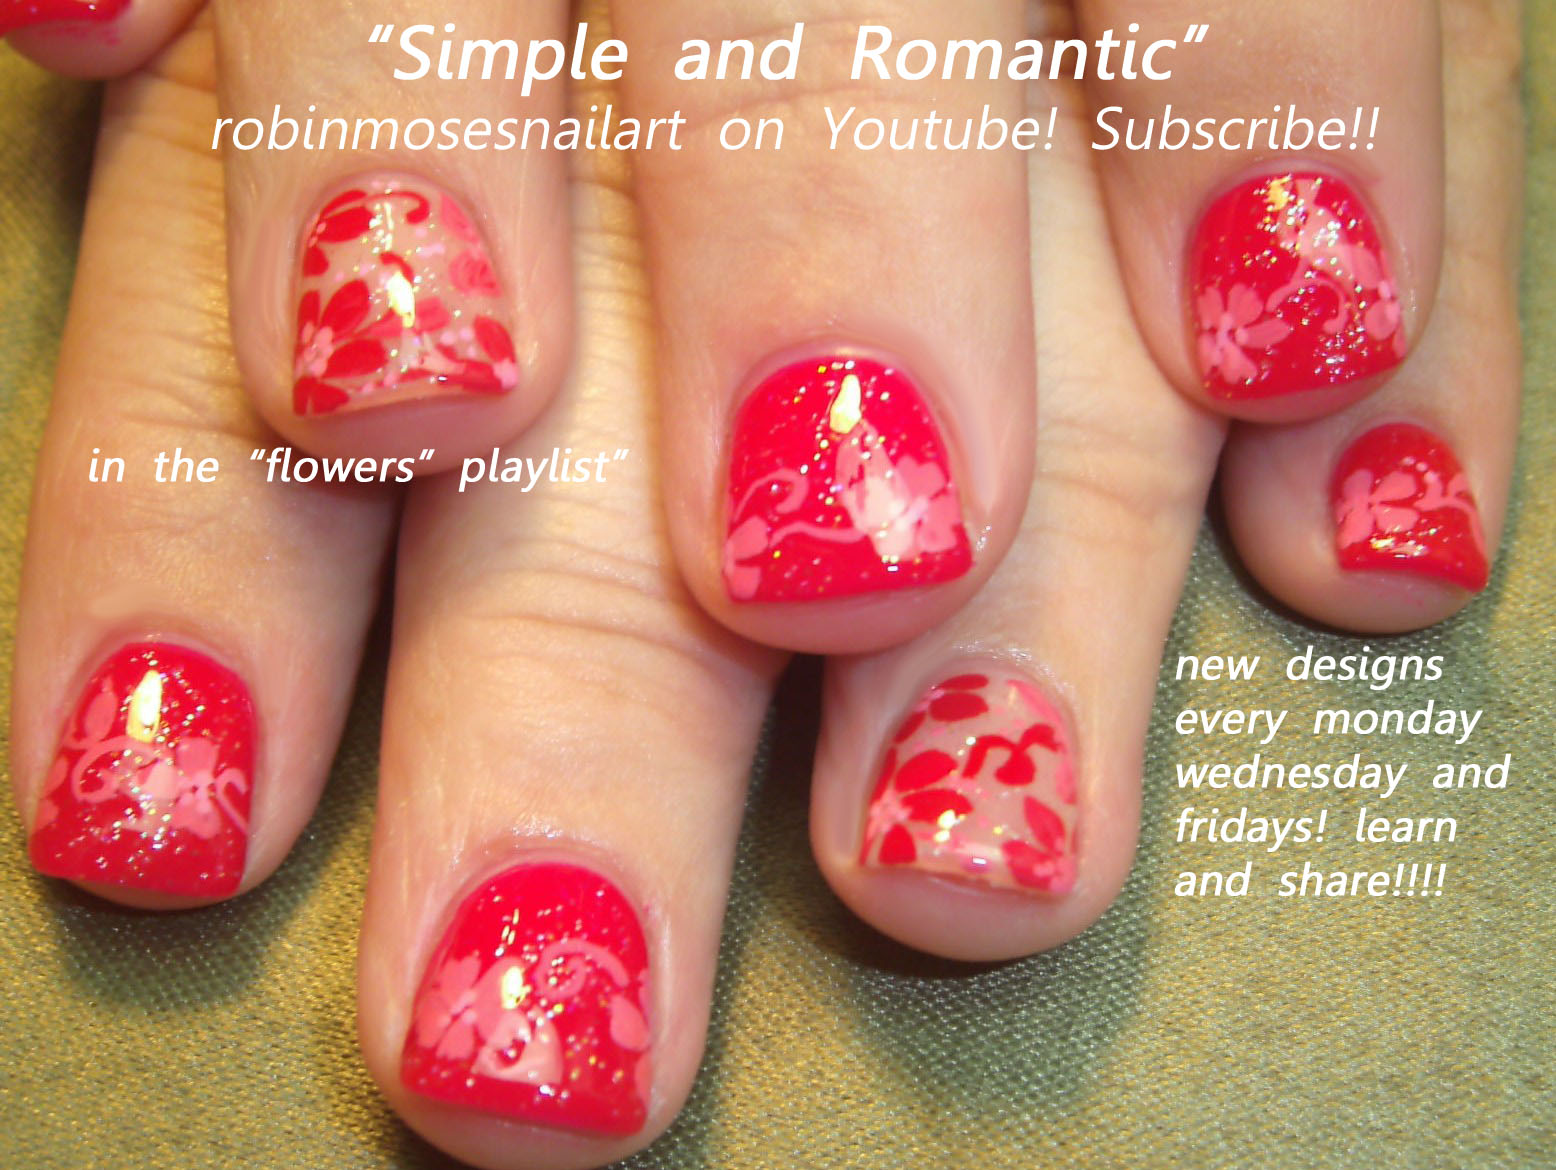 5. "Nail Art Lover? These Quotes Will Make You Smile" - wide 2